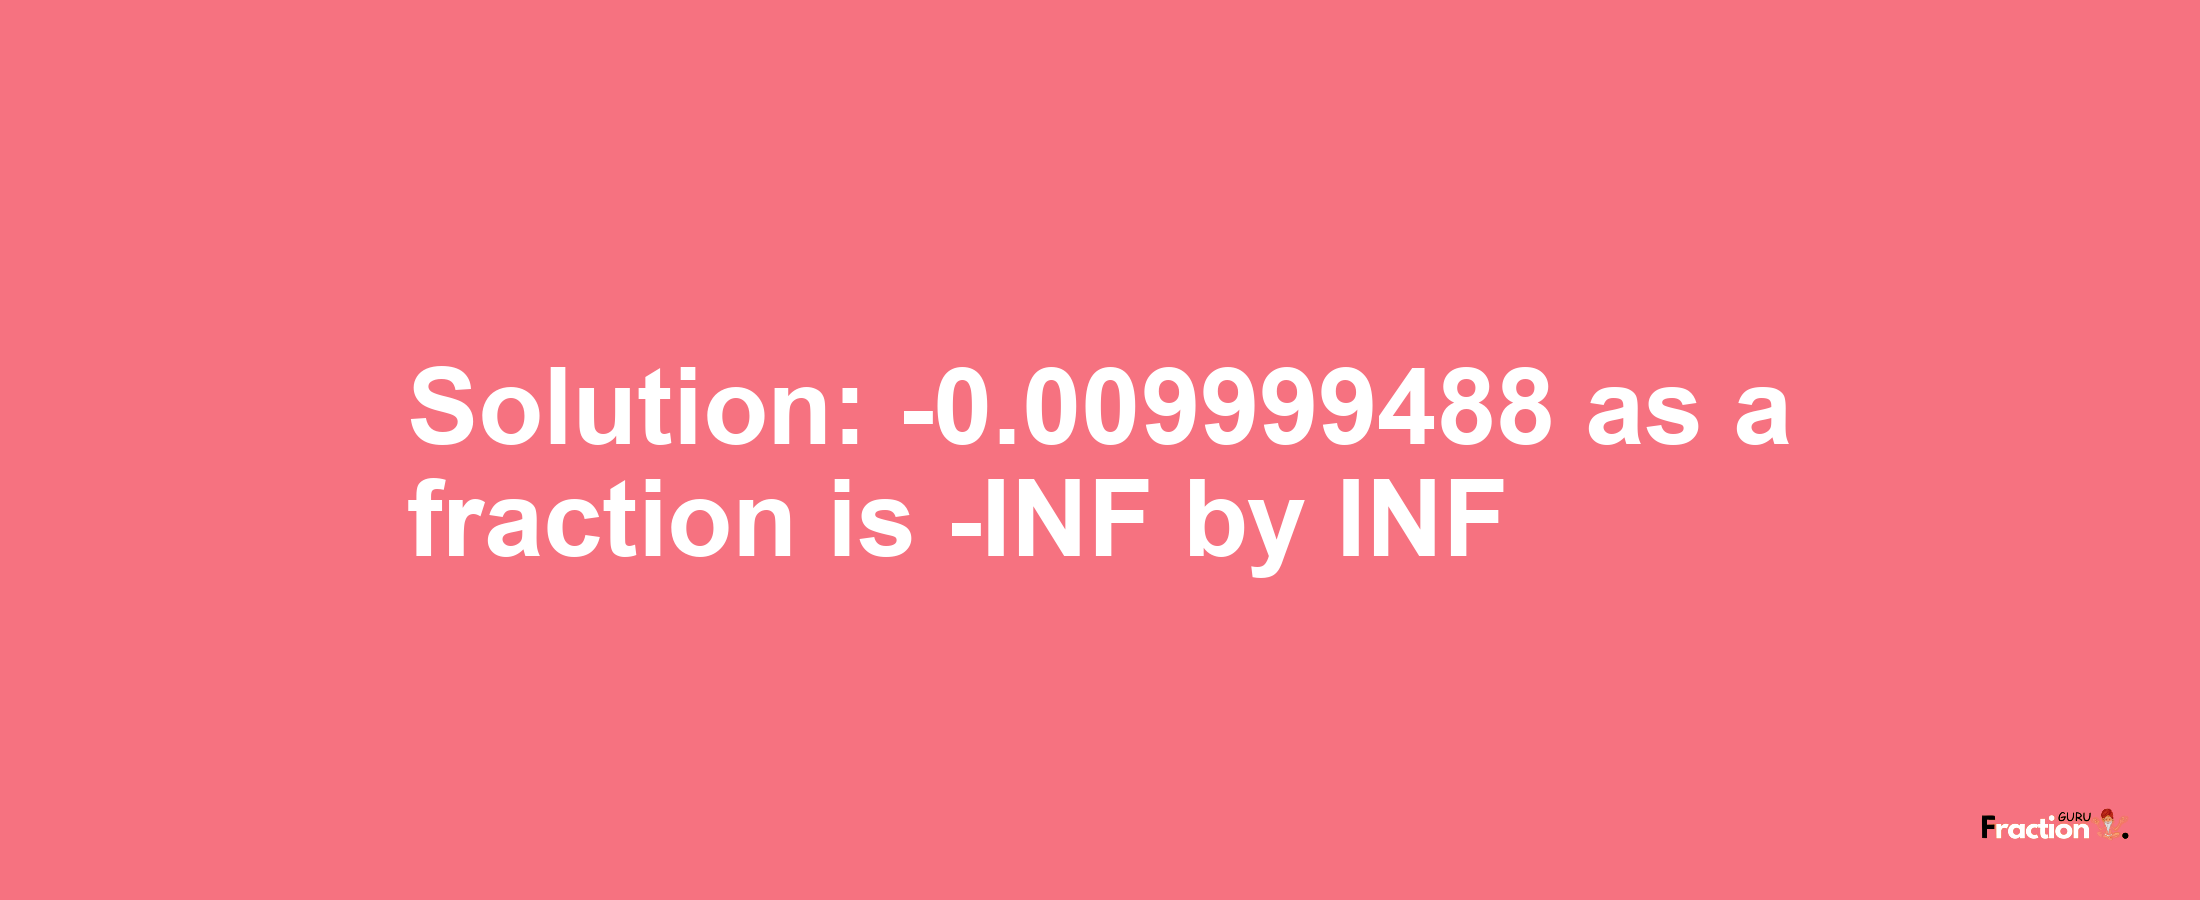 Solution:-0.009999488 as a fraction is -INF/INF